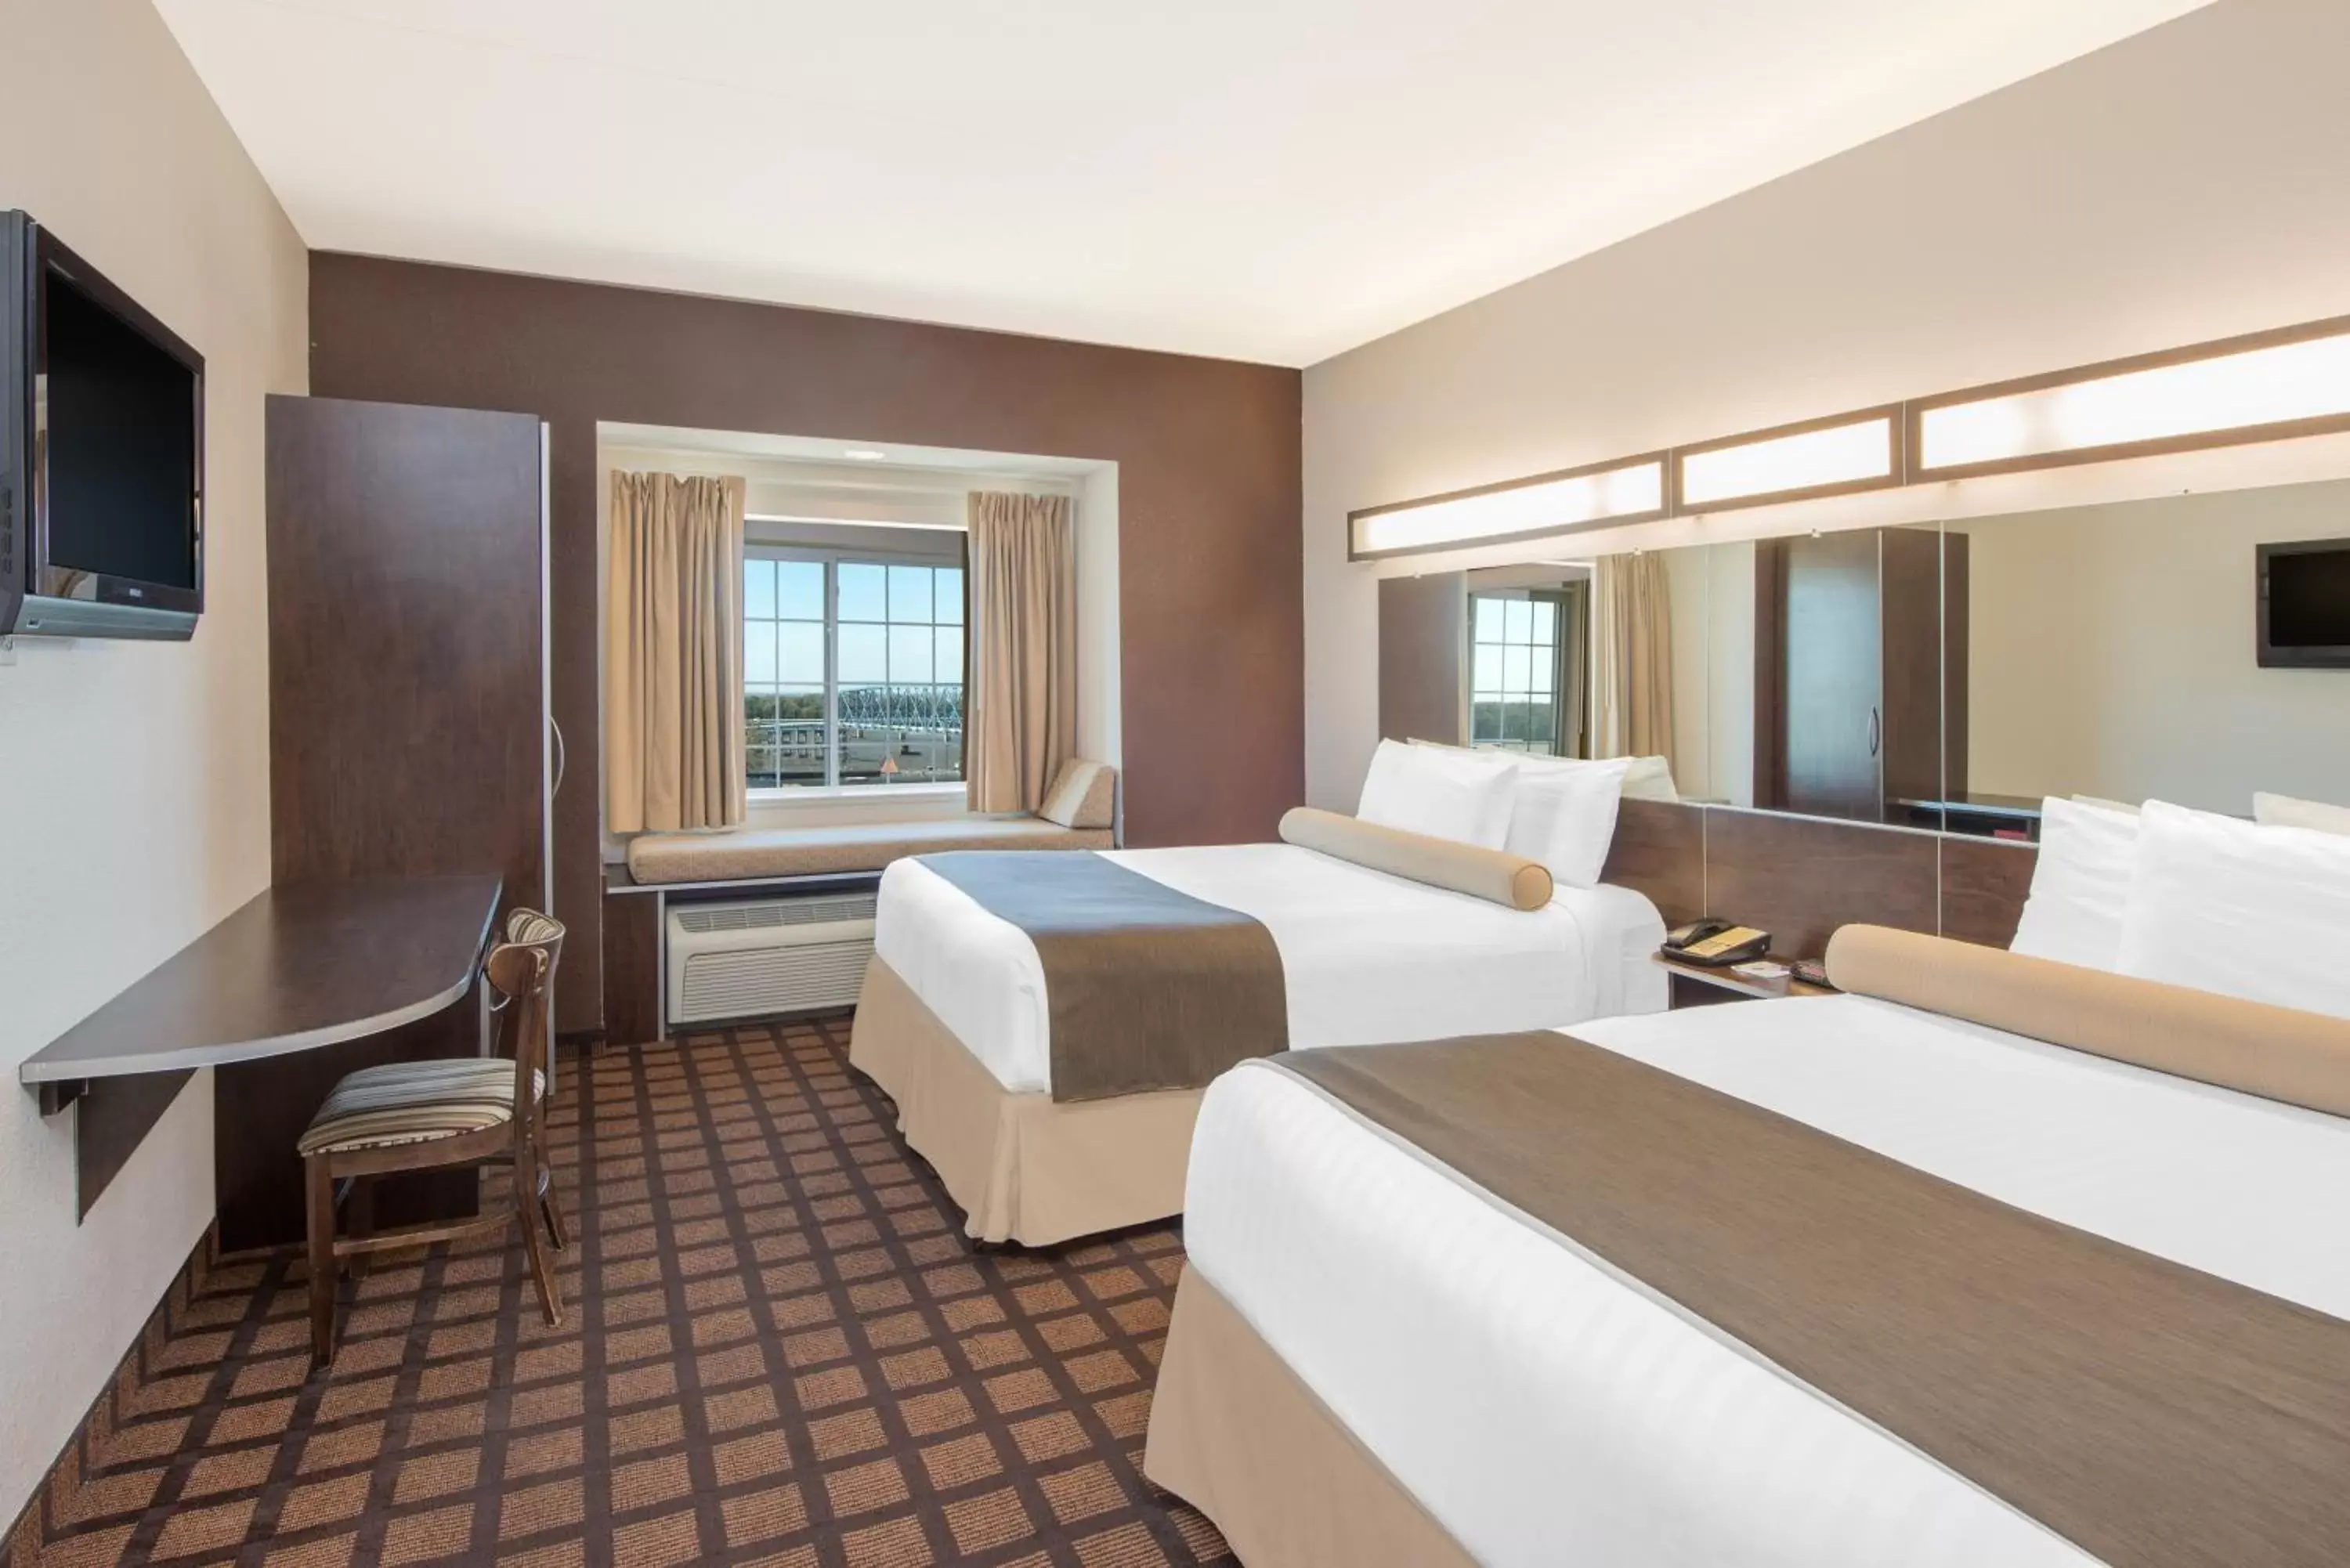 Other in Microtel Inn & Suites Quincy by Wyndham